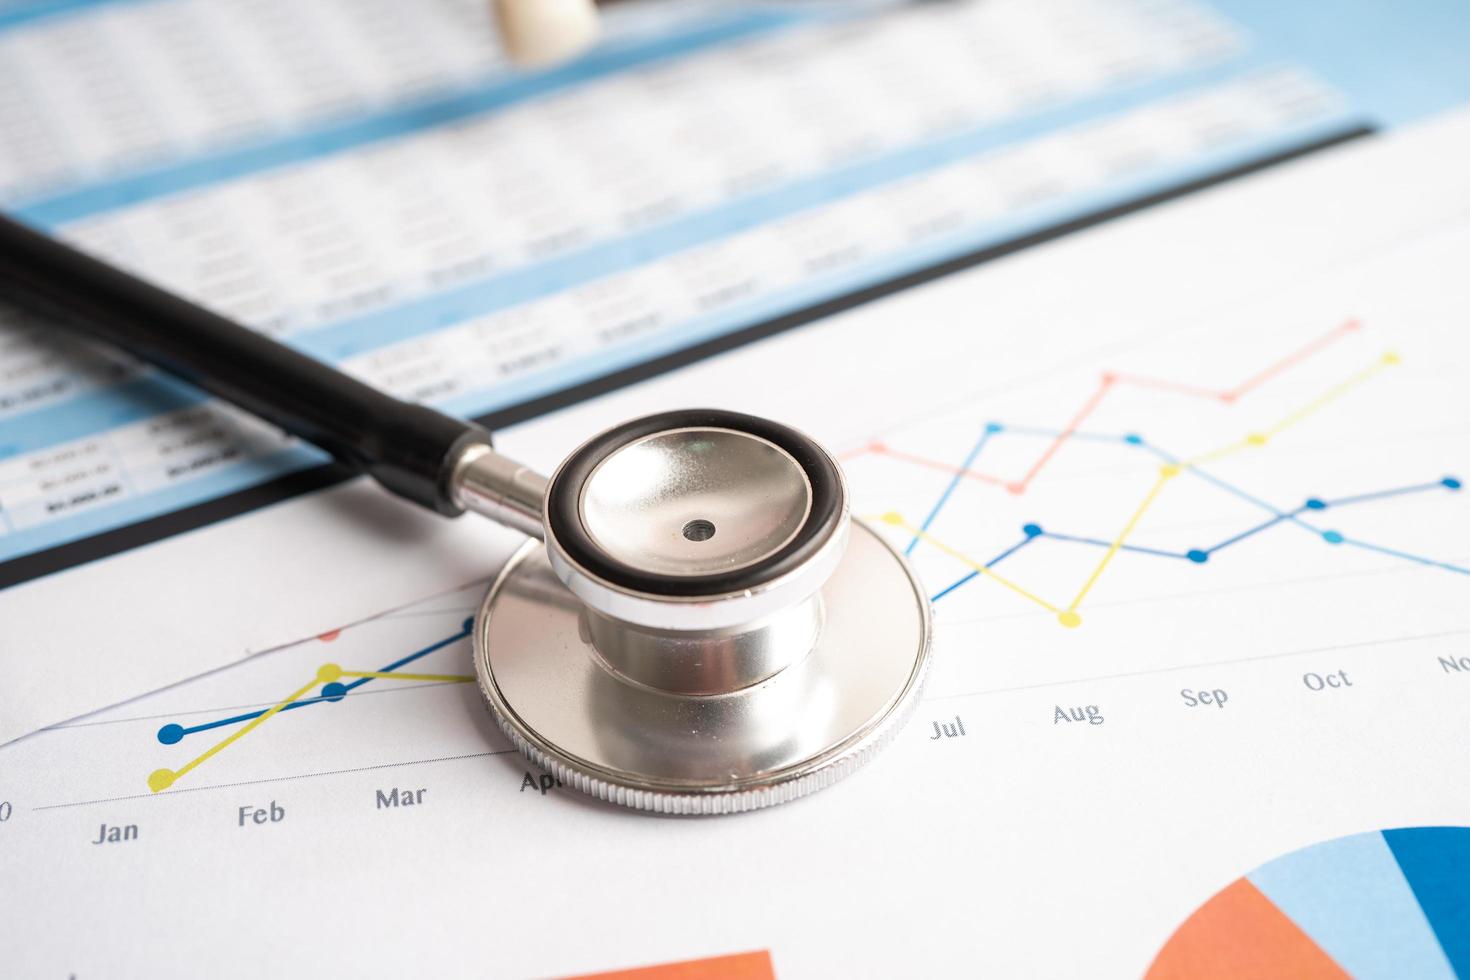 Stethoscope on charts and graphs paper, Finance, Account, Statistics, Investment, Analytic research data economy and Business company concept. photo